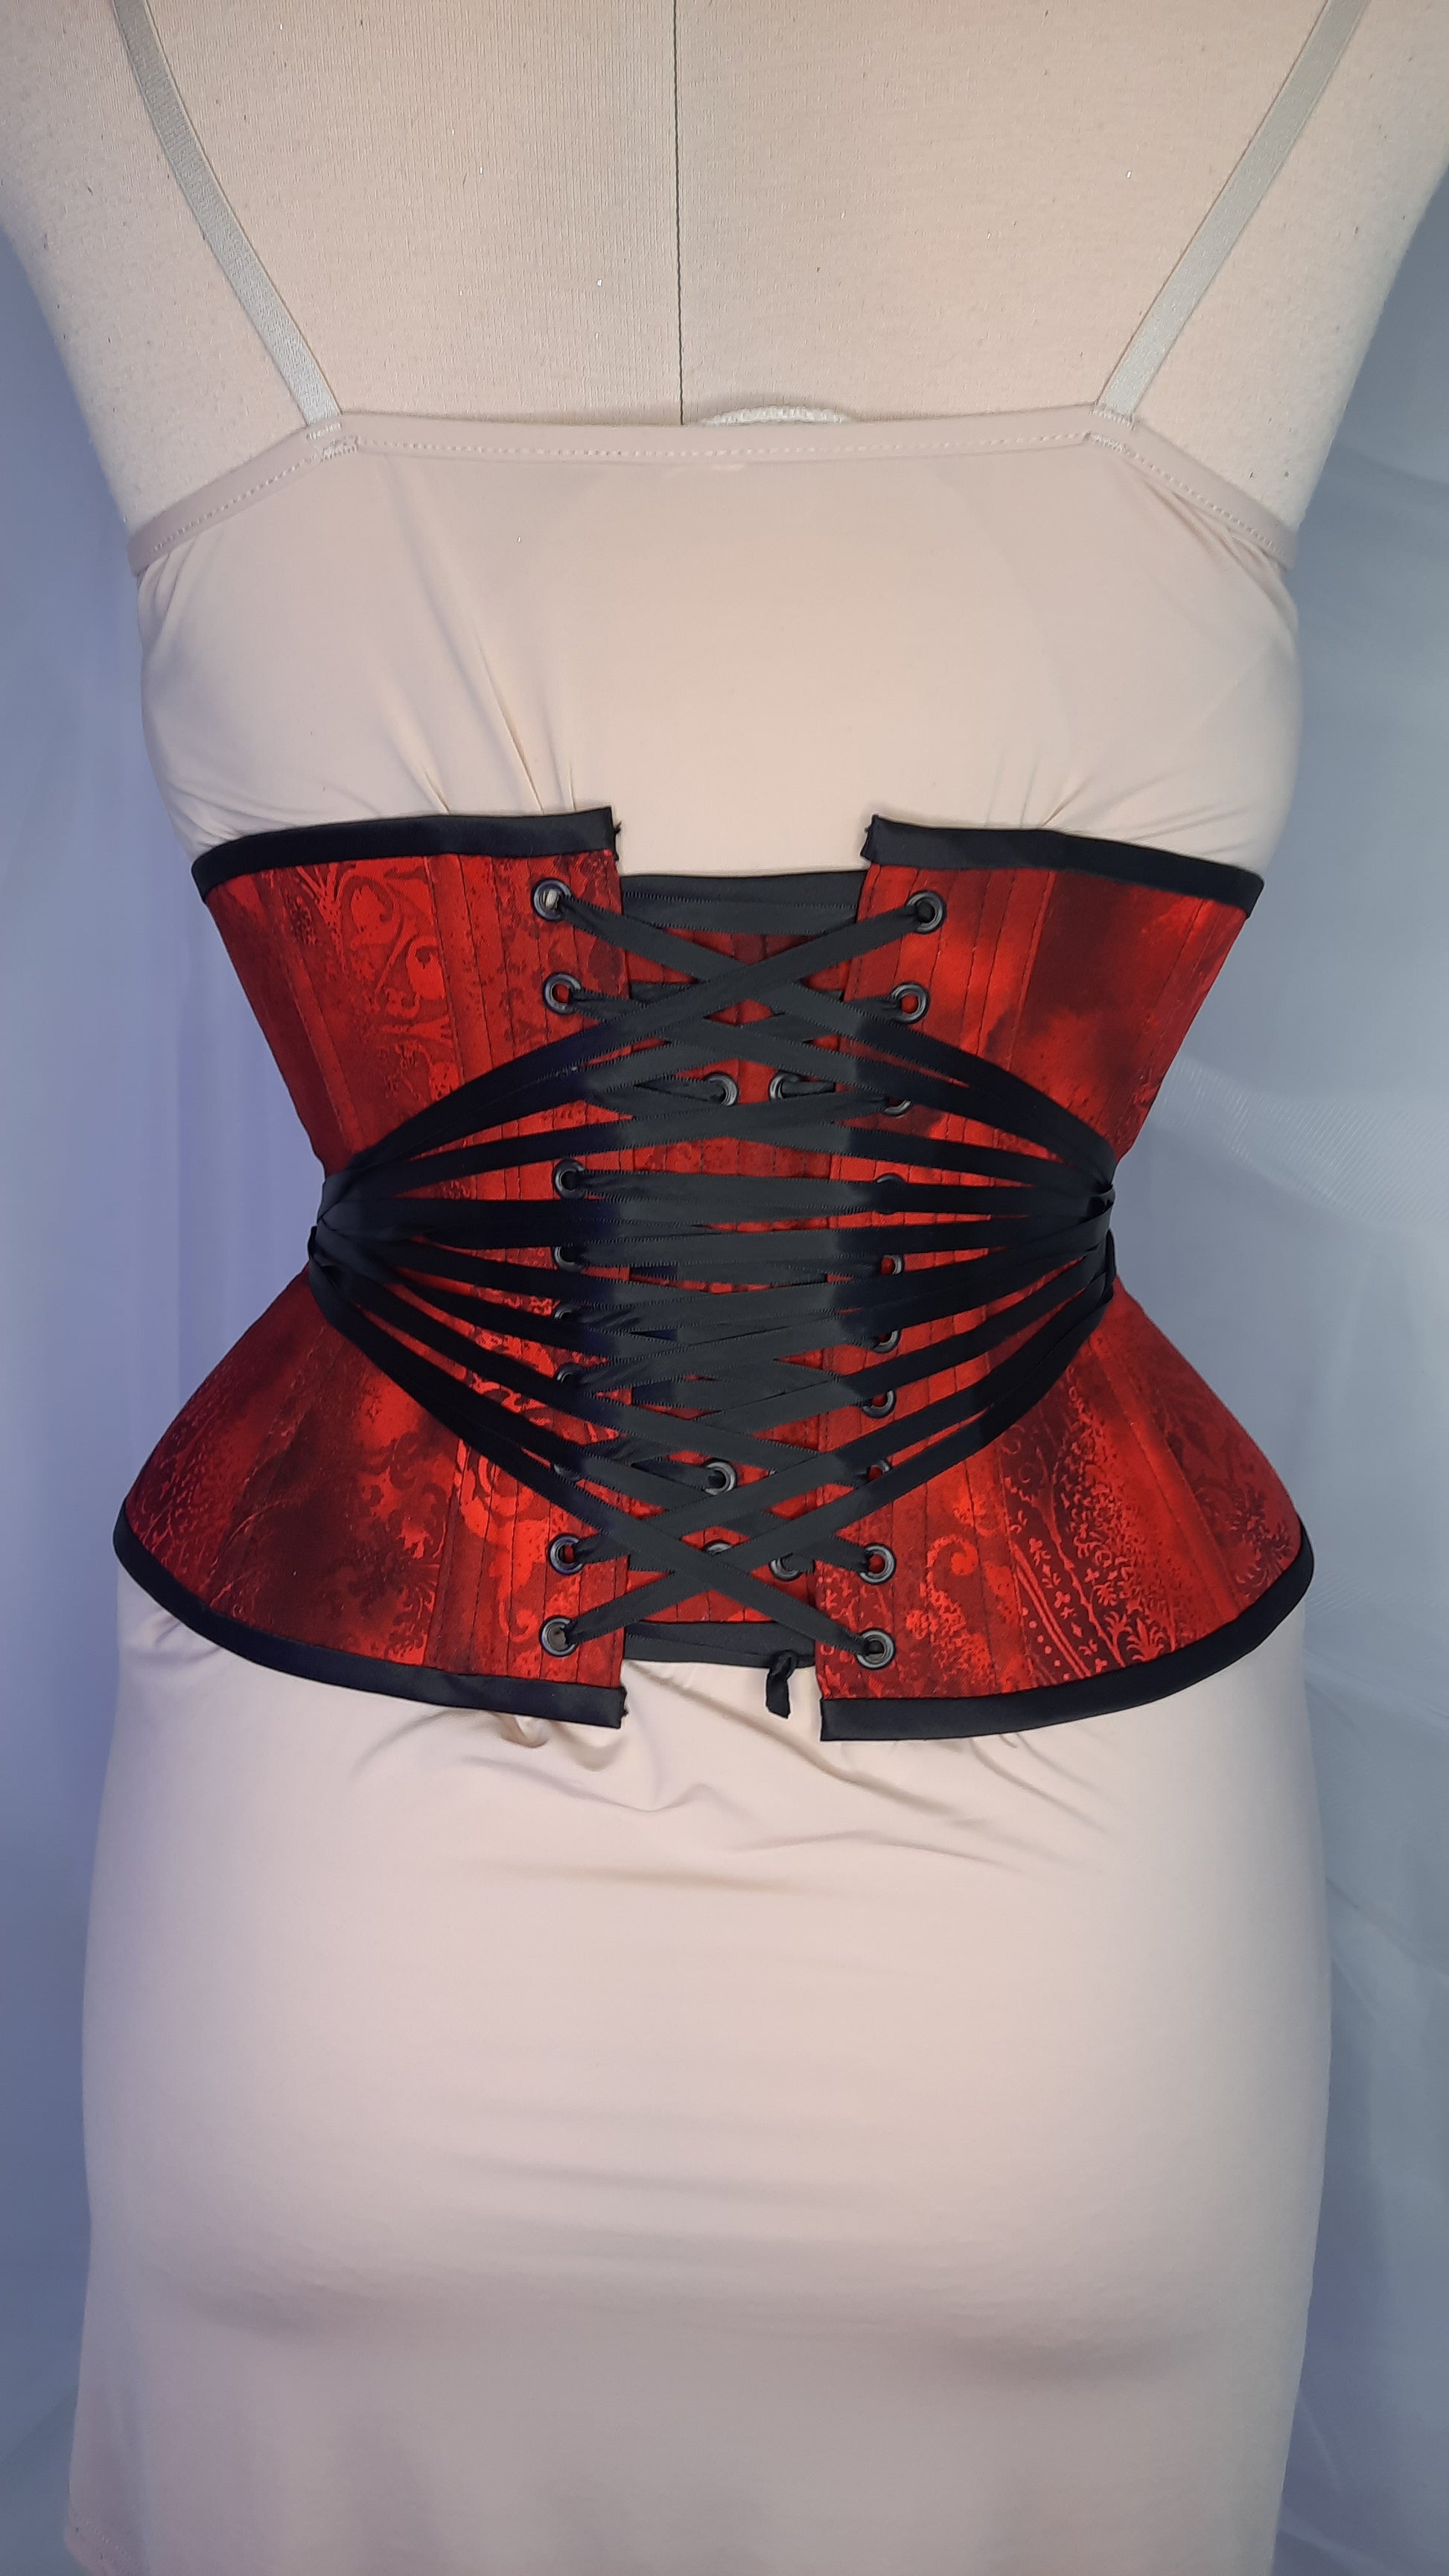 Fun with Fan Lacing: The Why & How of This Intricate Corset Lacing